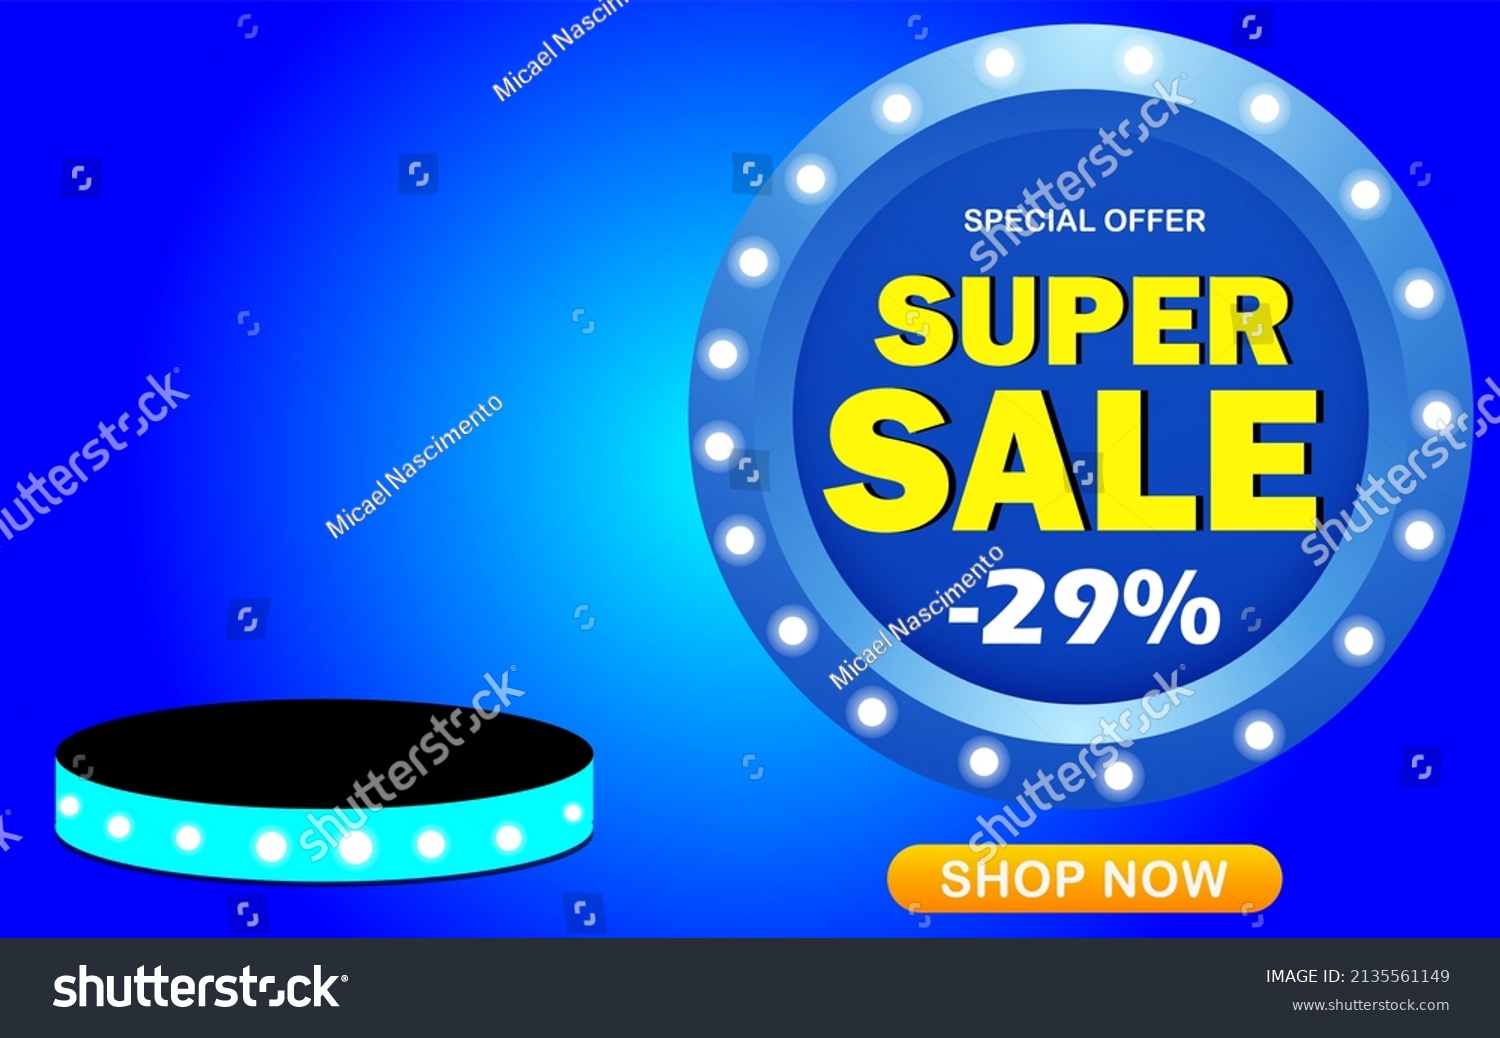 SVG of 29% off. Super sale banner. 29 percent off. Mega sale special offer. Banner for special promotion announcement. Circular blue template with lights around. svg